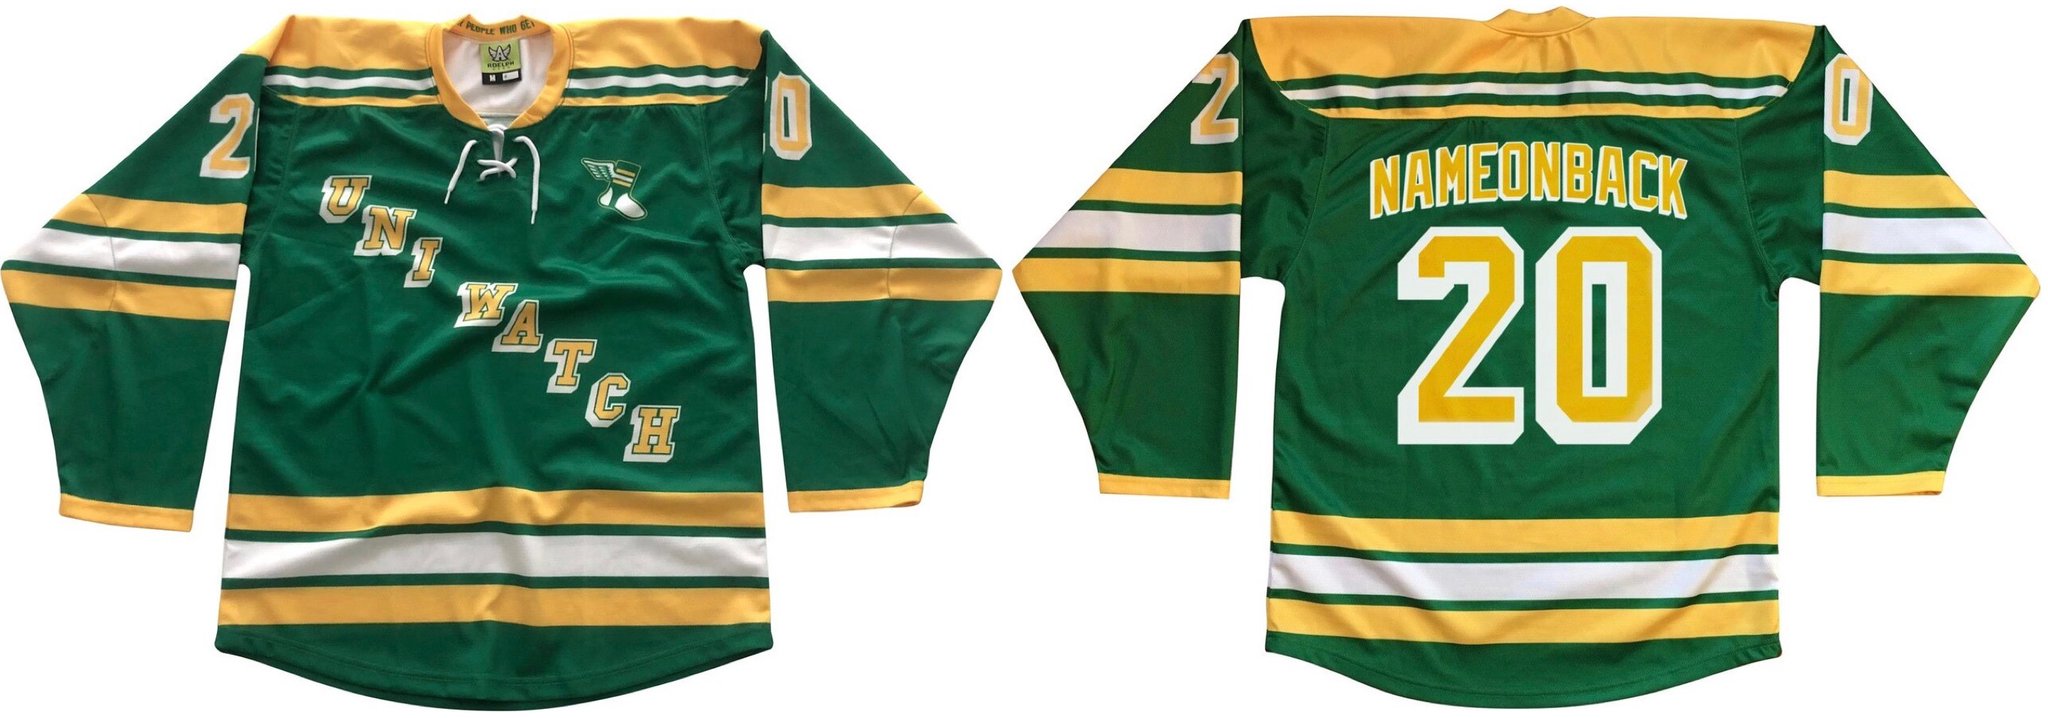 hockey jersey option c or a